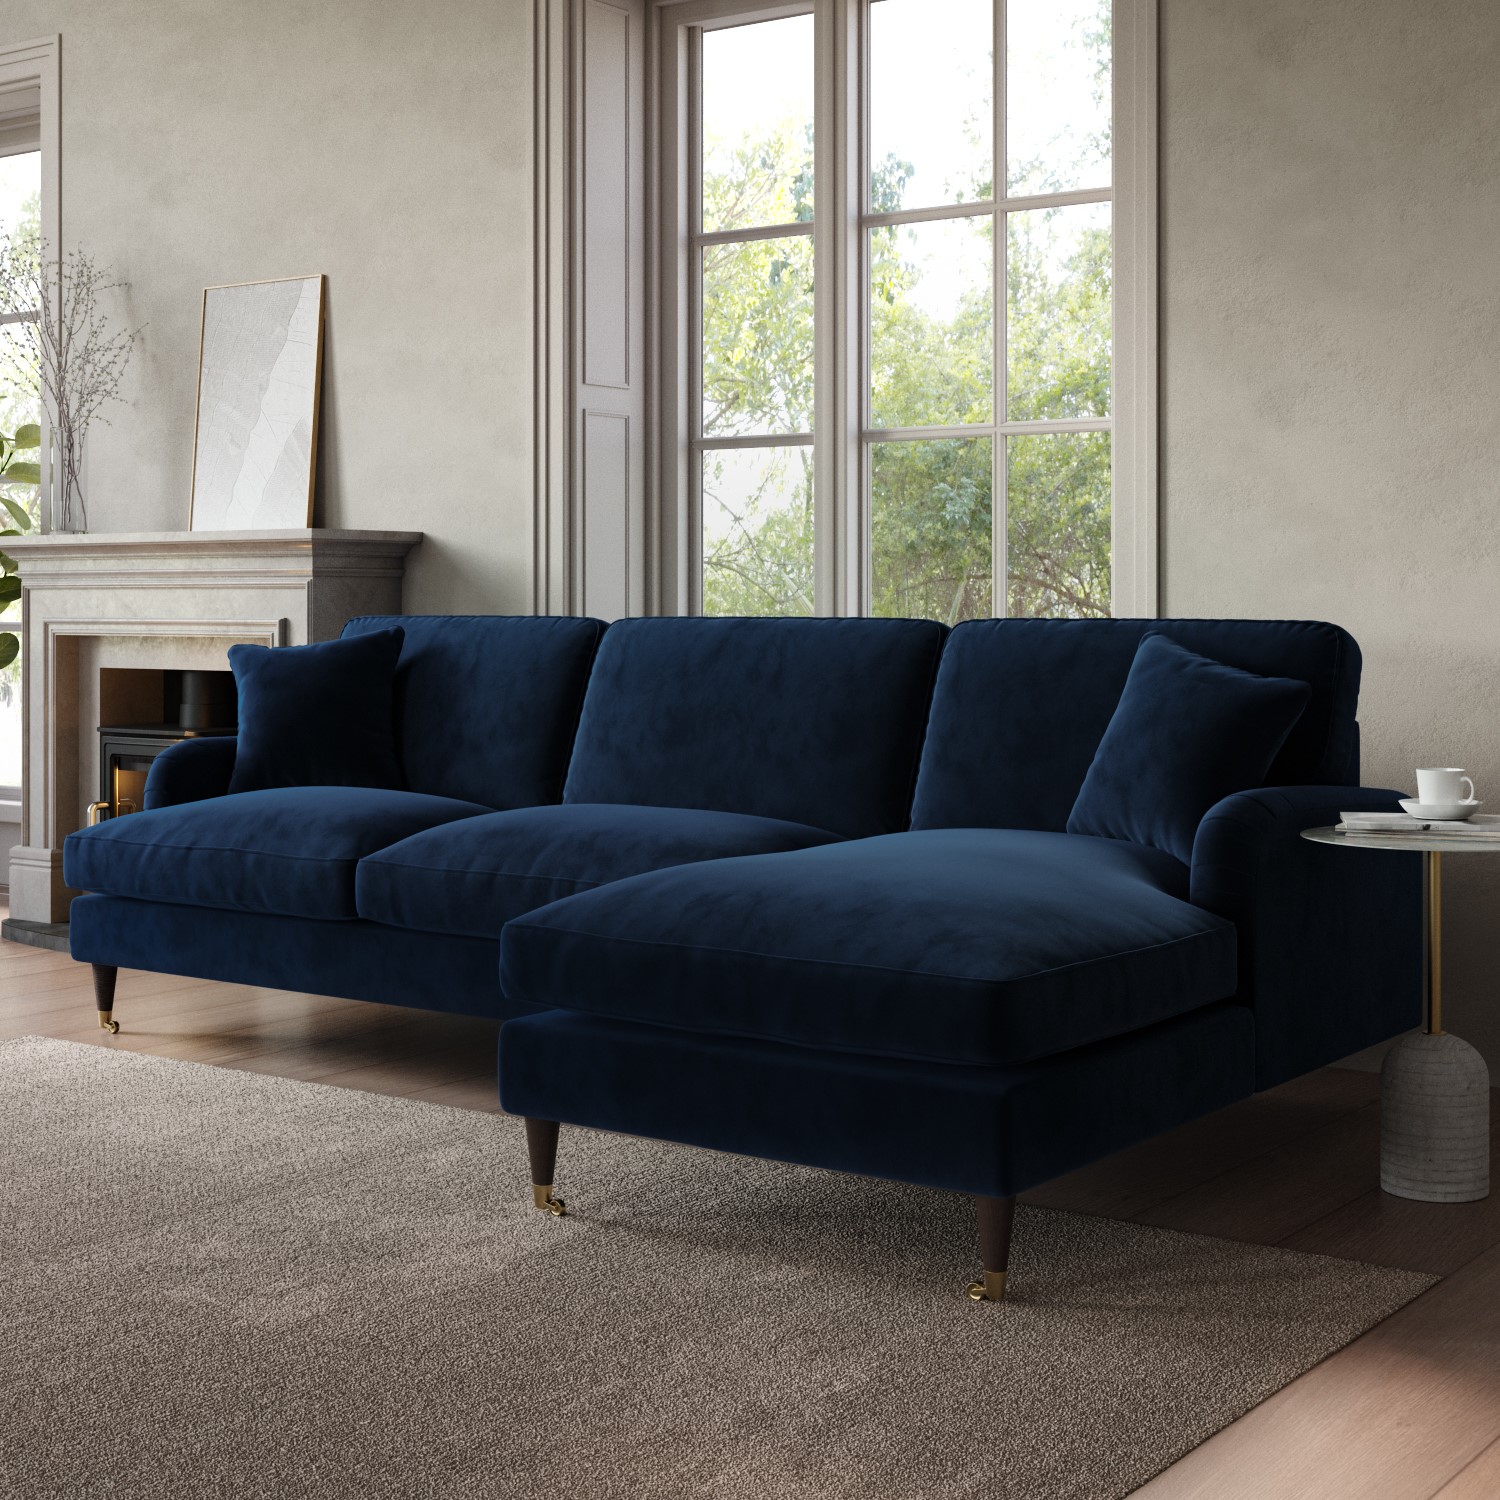 Read more about Navy velvet right hand facing l shaped sofa seats 4 payton